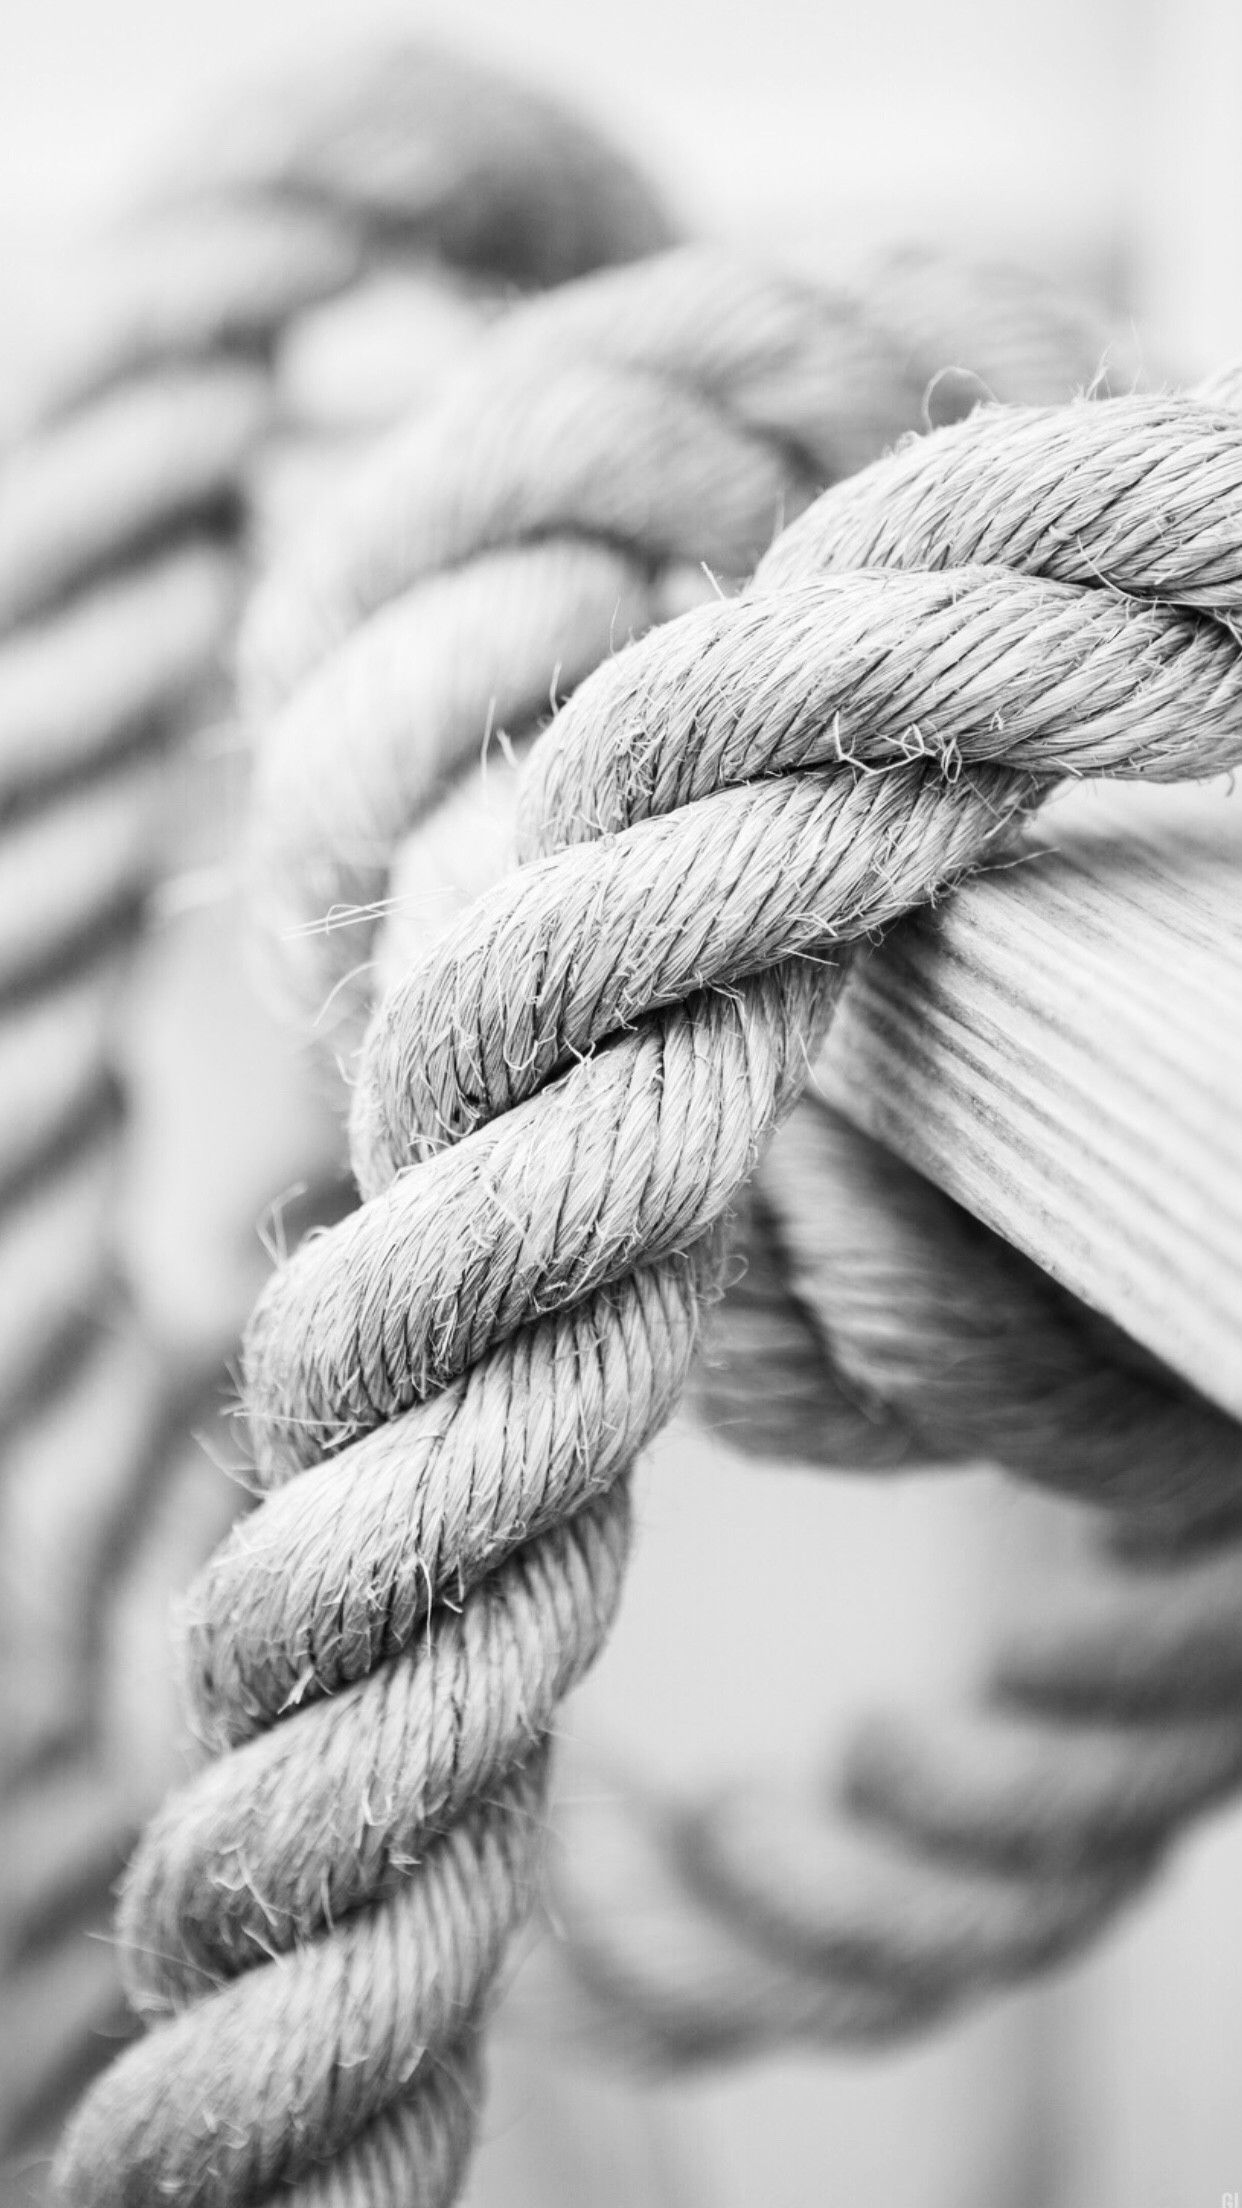 iphone 6s wallpaper,rope,black and white,wool,close up,thread